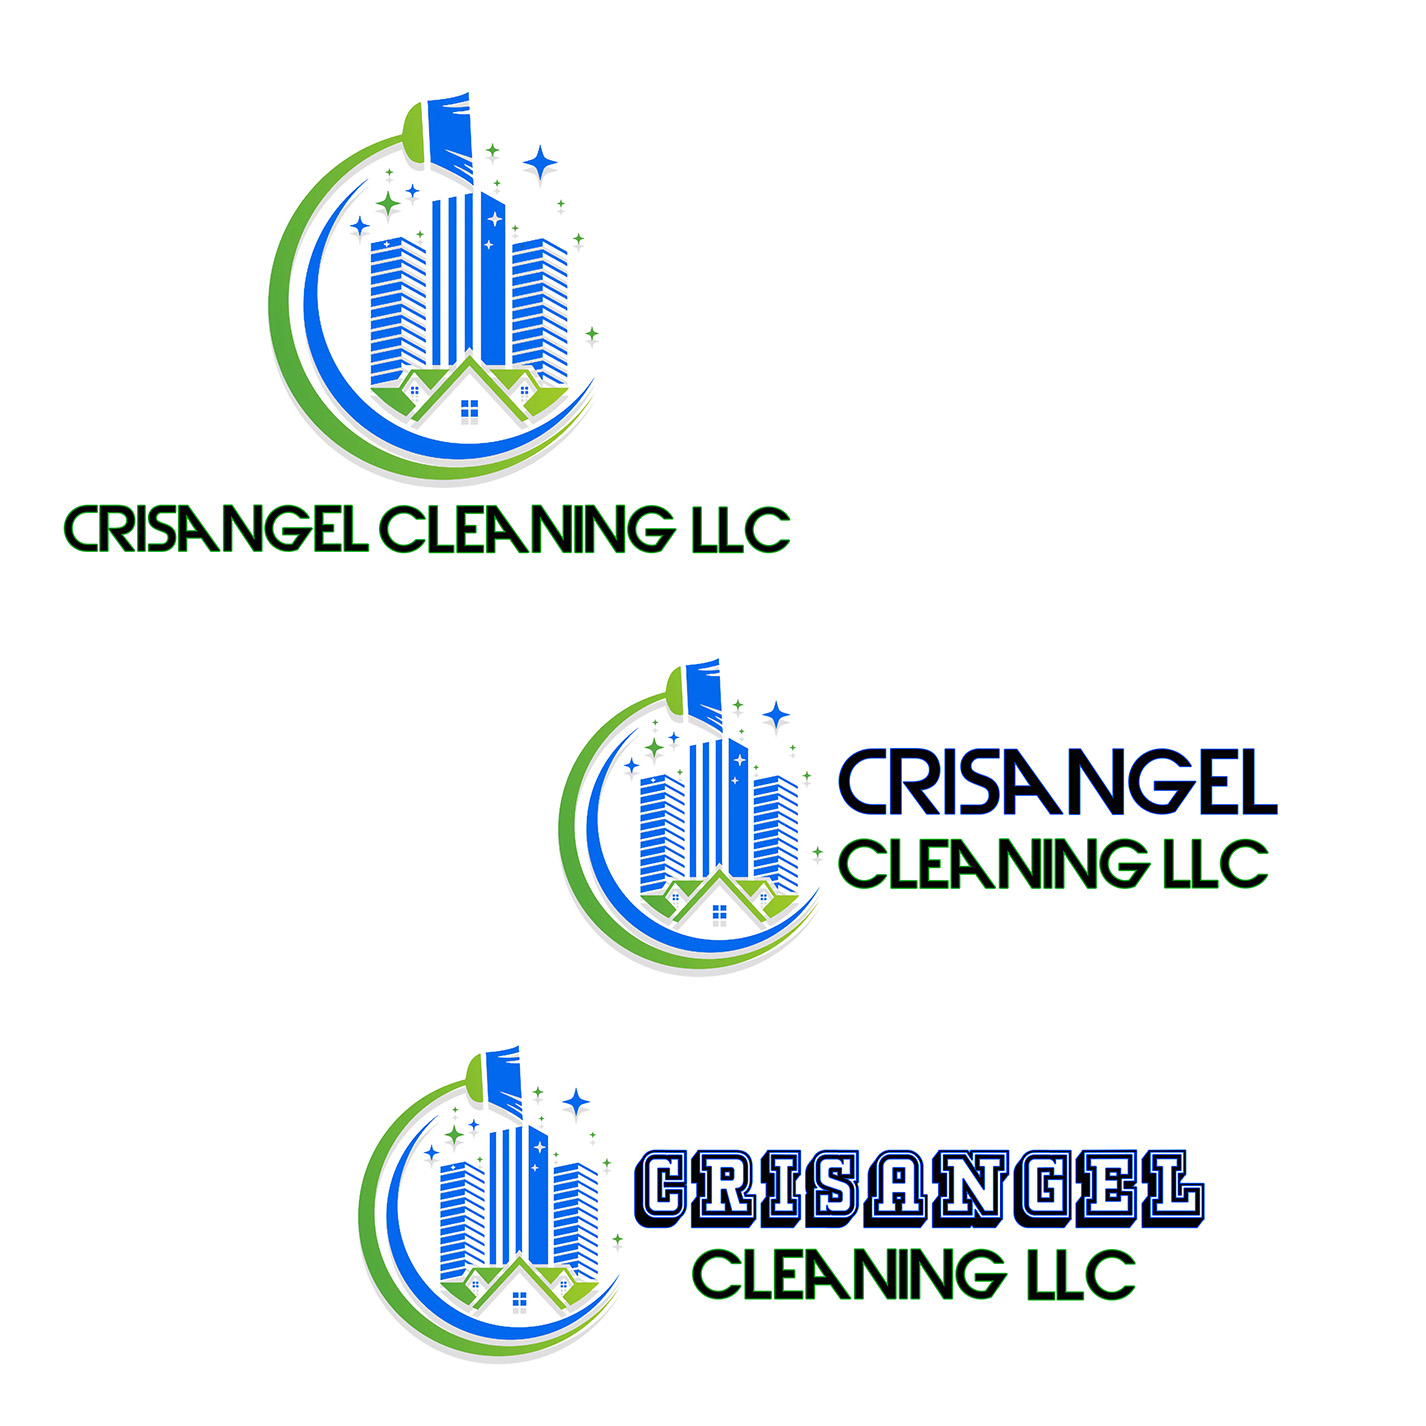 Crisangel Cleaning LLC logo-Recovered